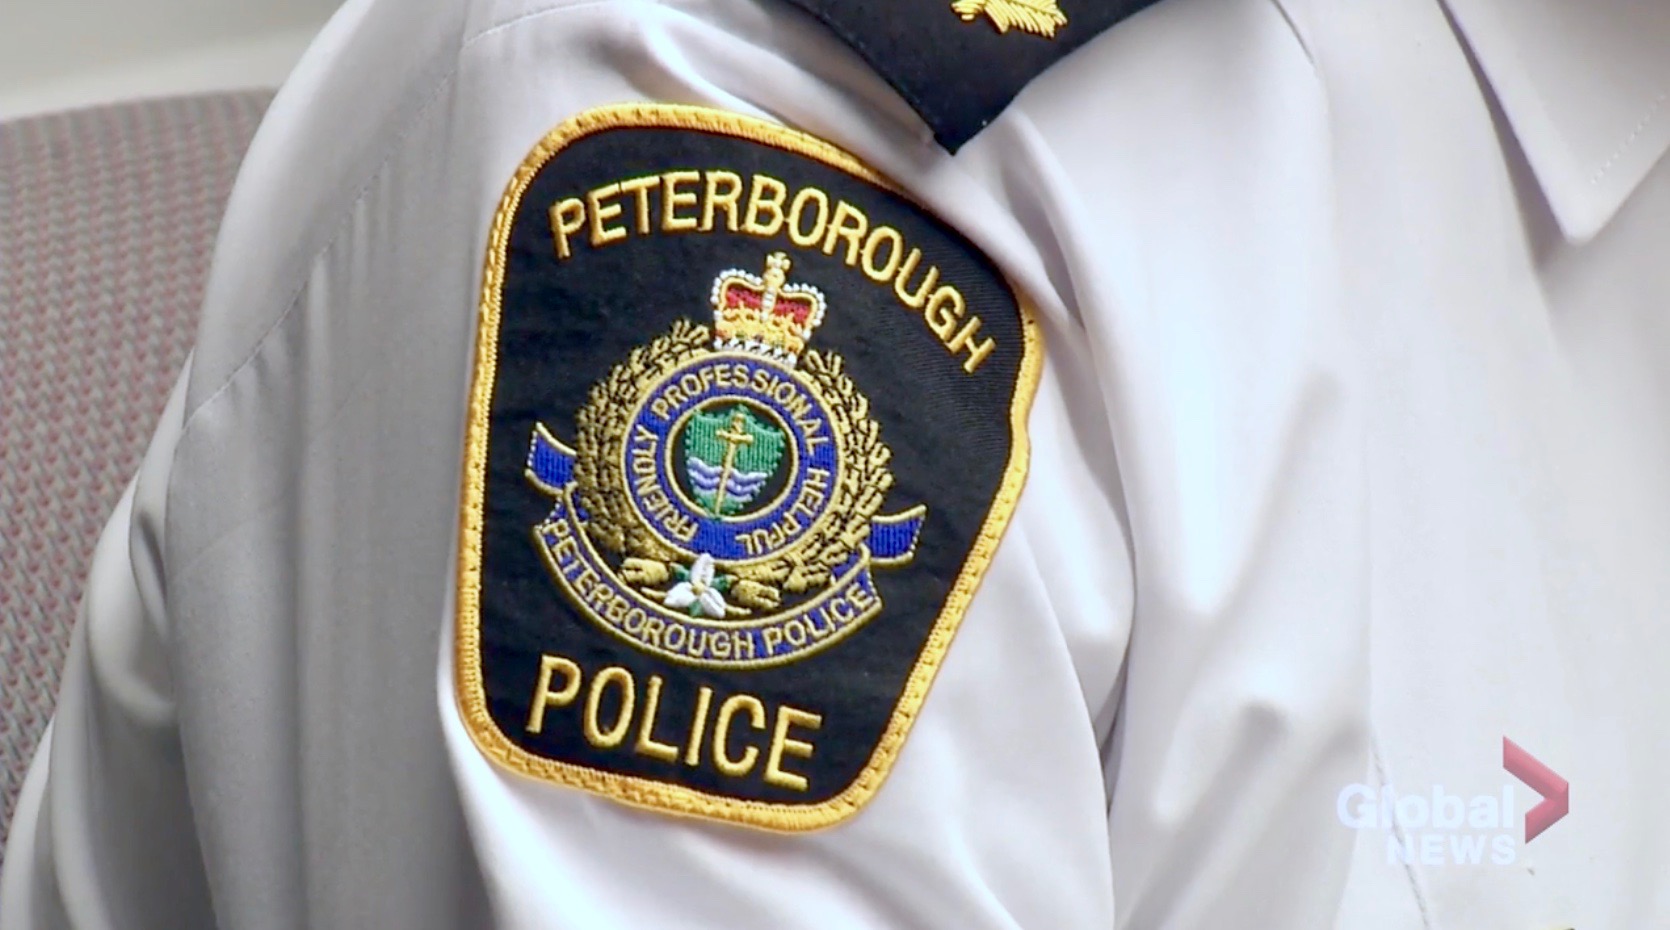 Firearms missing after stolen vehicle recovered in Peterborough: police